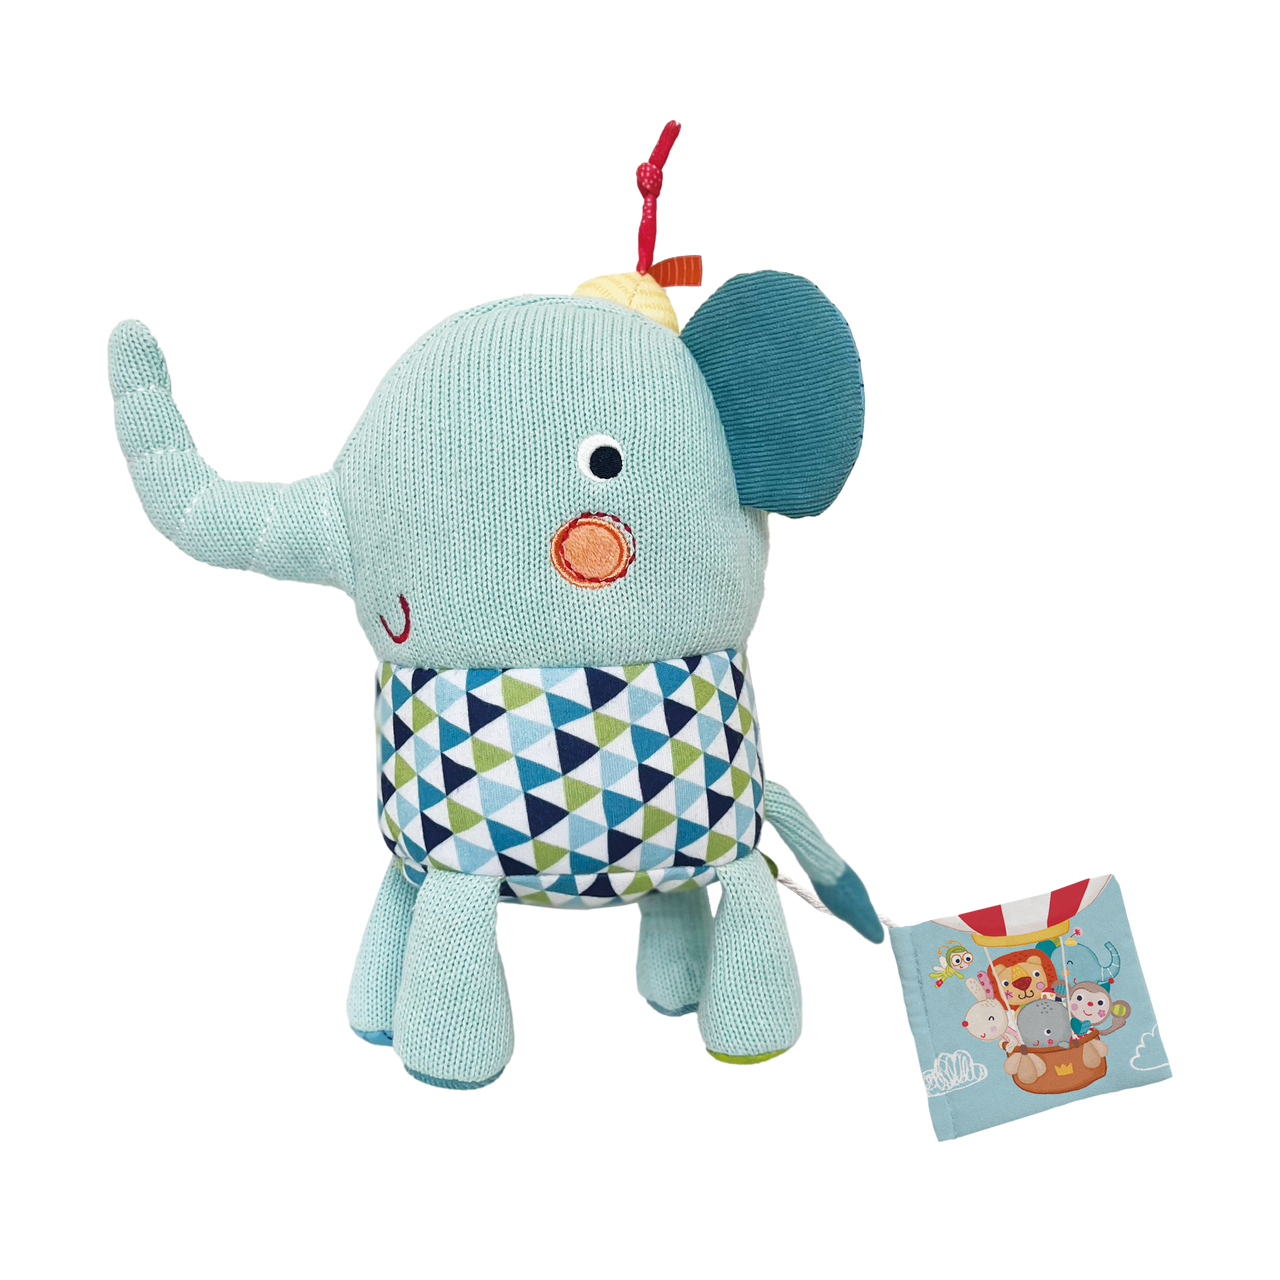 Best Friend Lolo Plush Toy product image